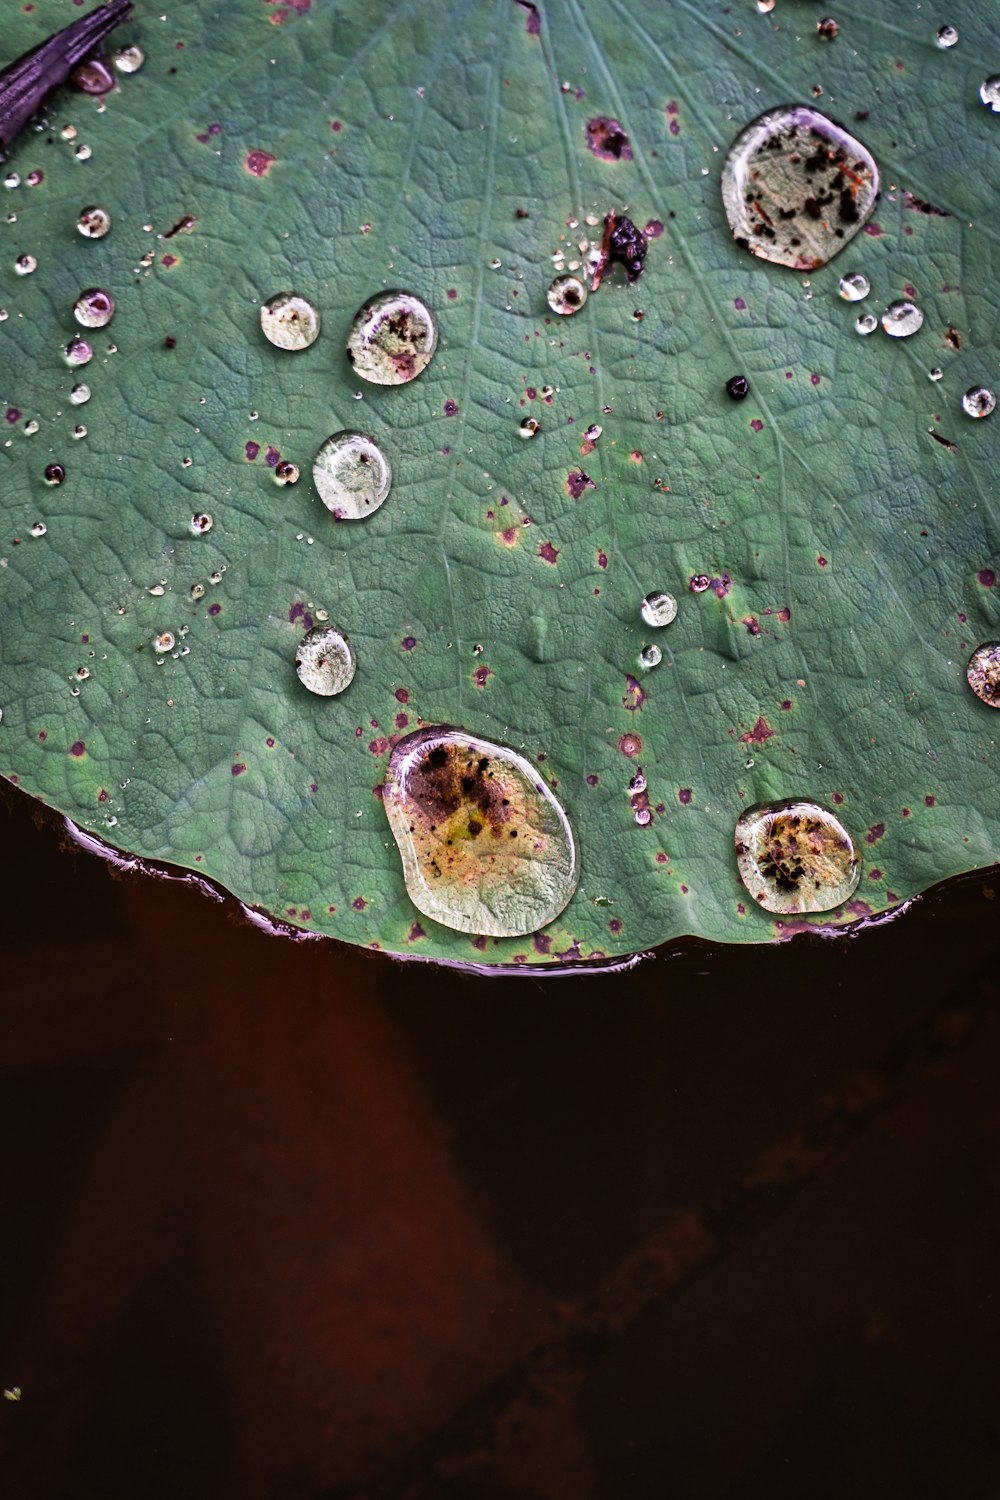 a green leaf with lots of water droplets on it